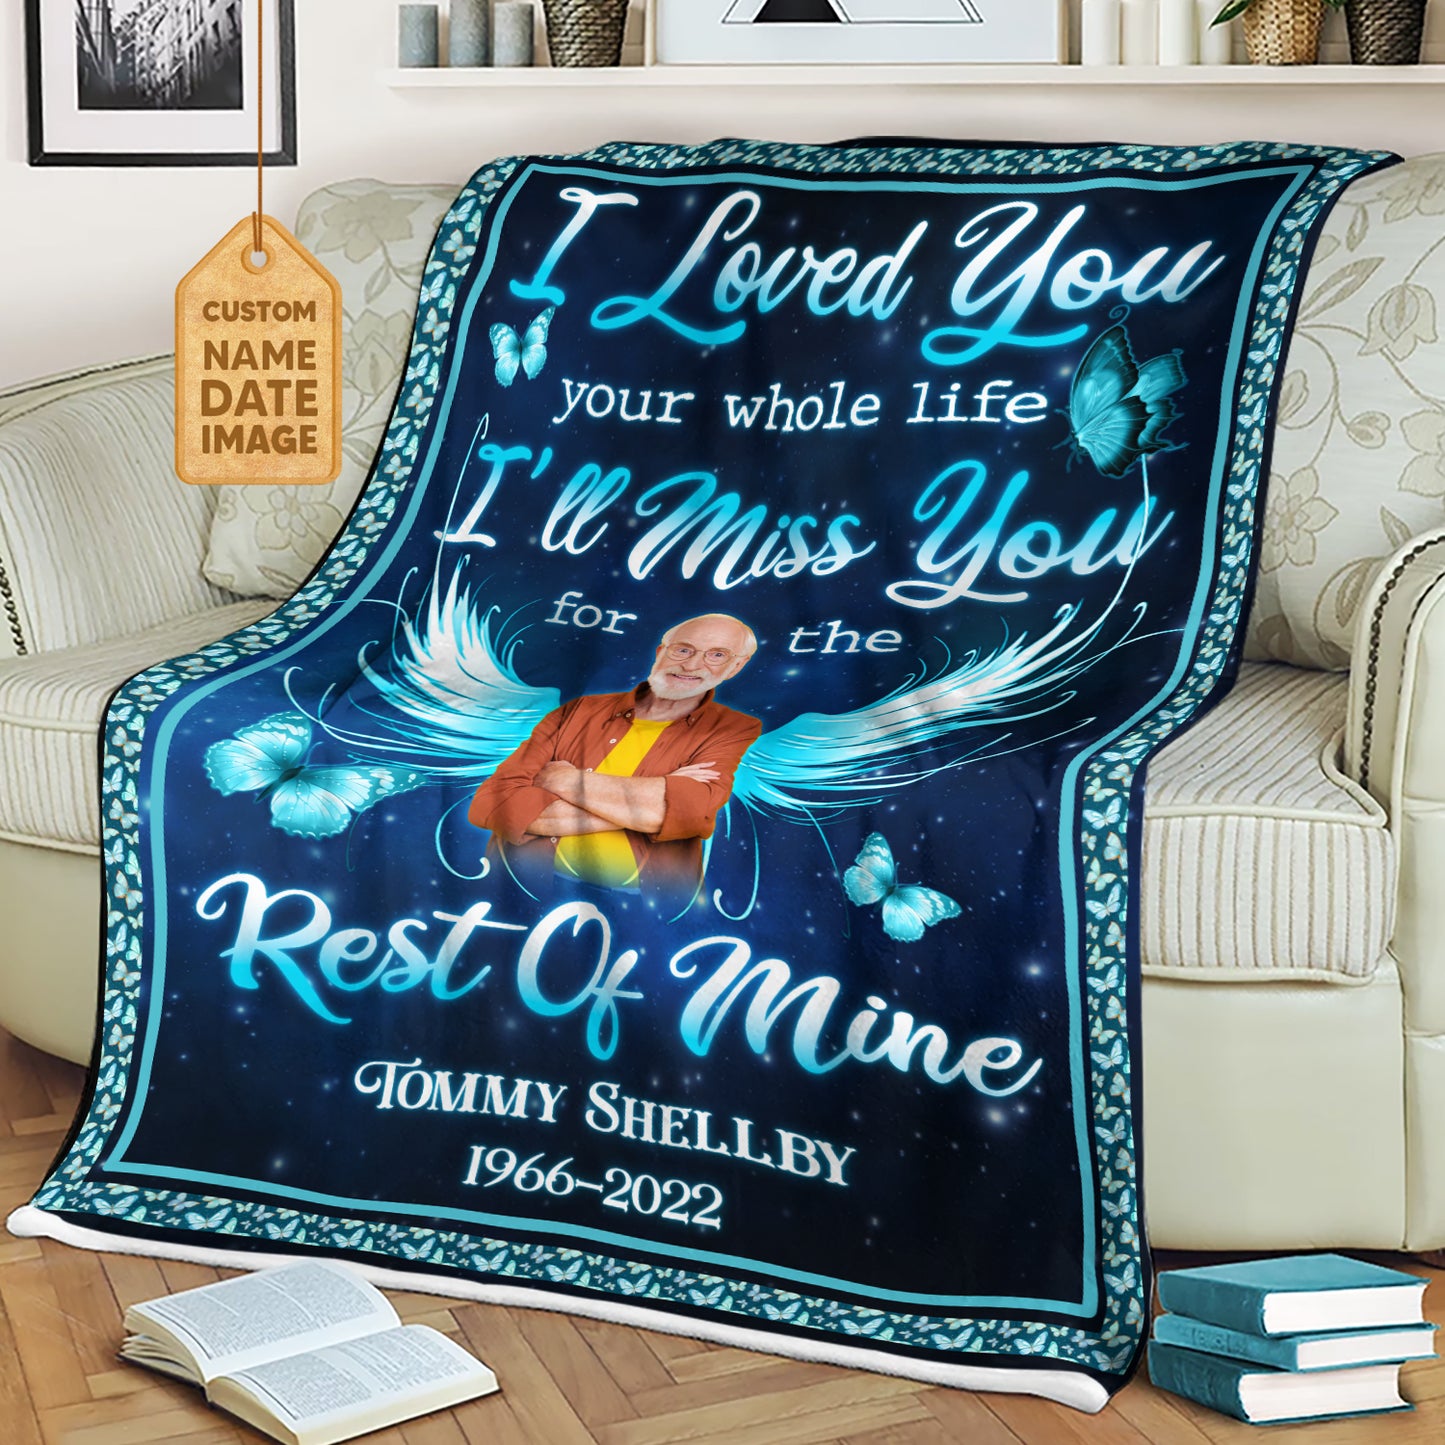 I Love You Your Whole Life For The Rest Of Mine Fleece Blanket